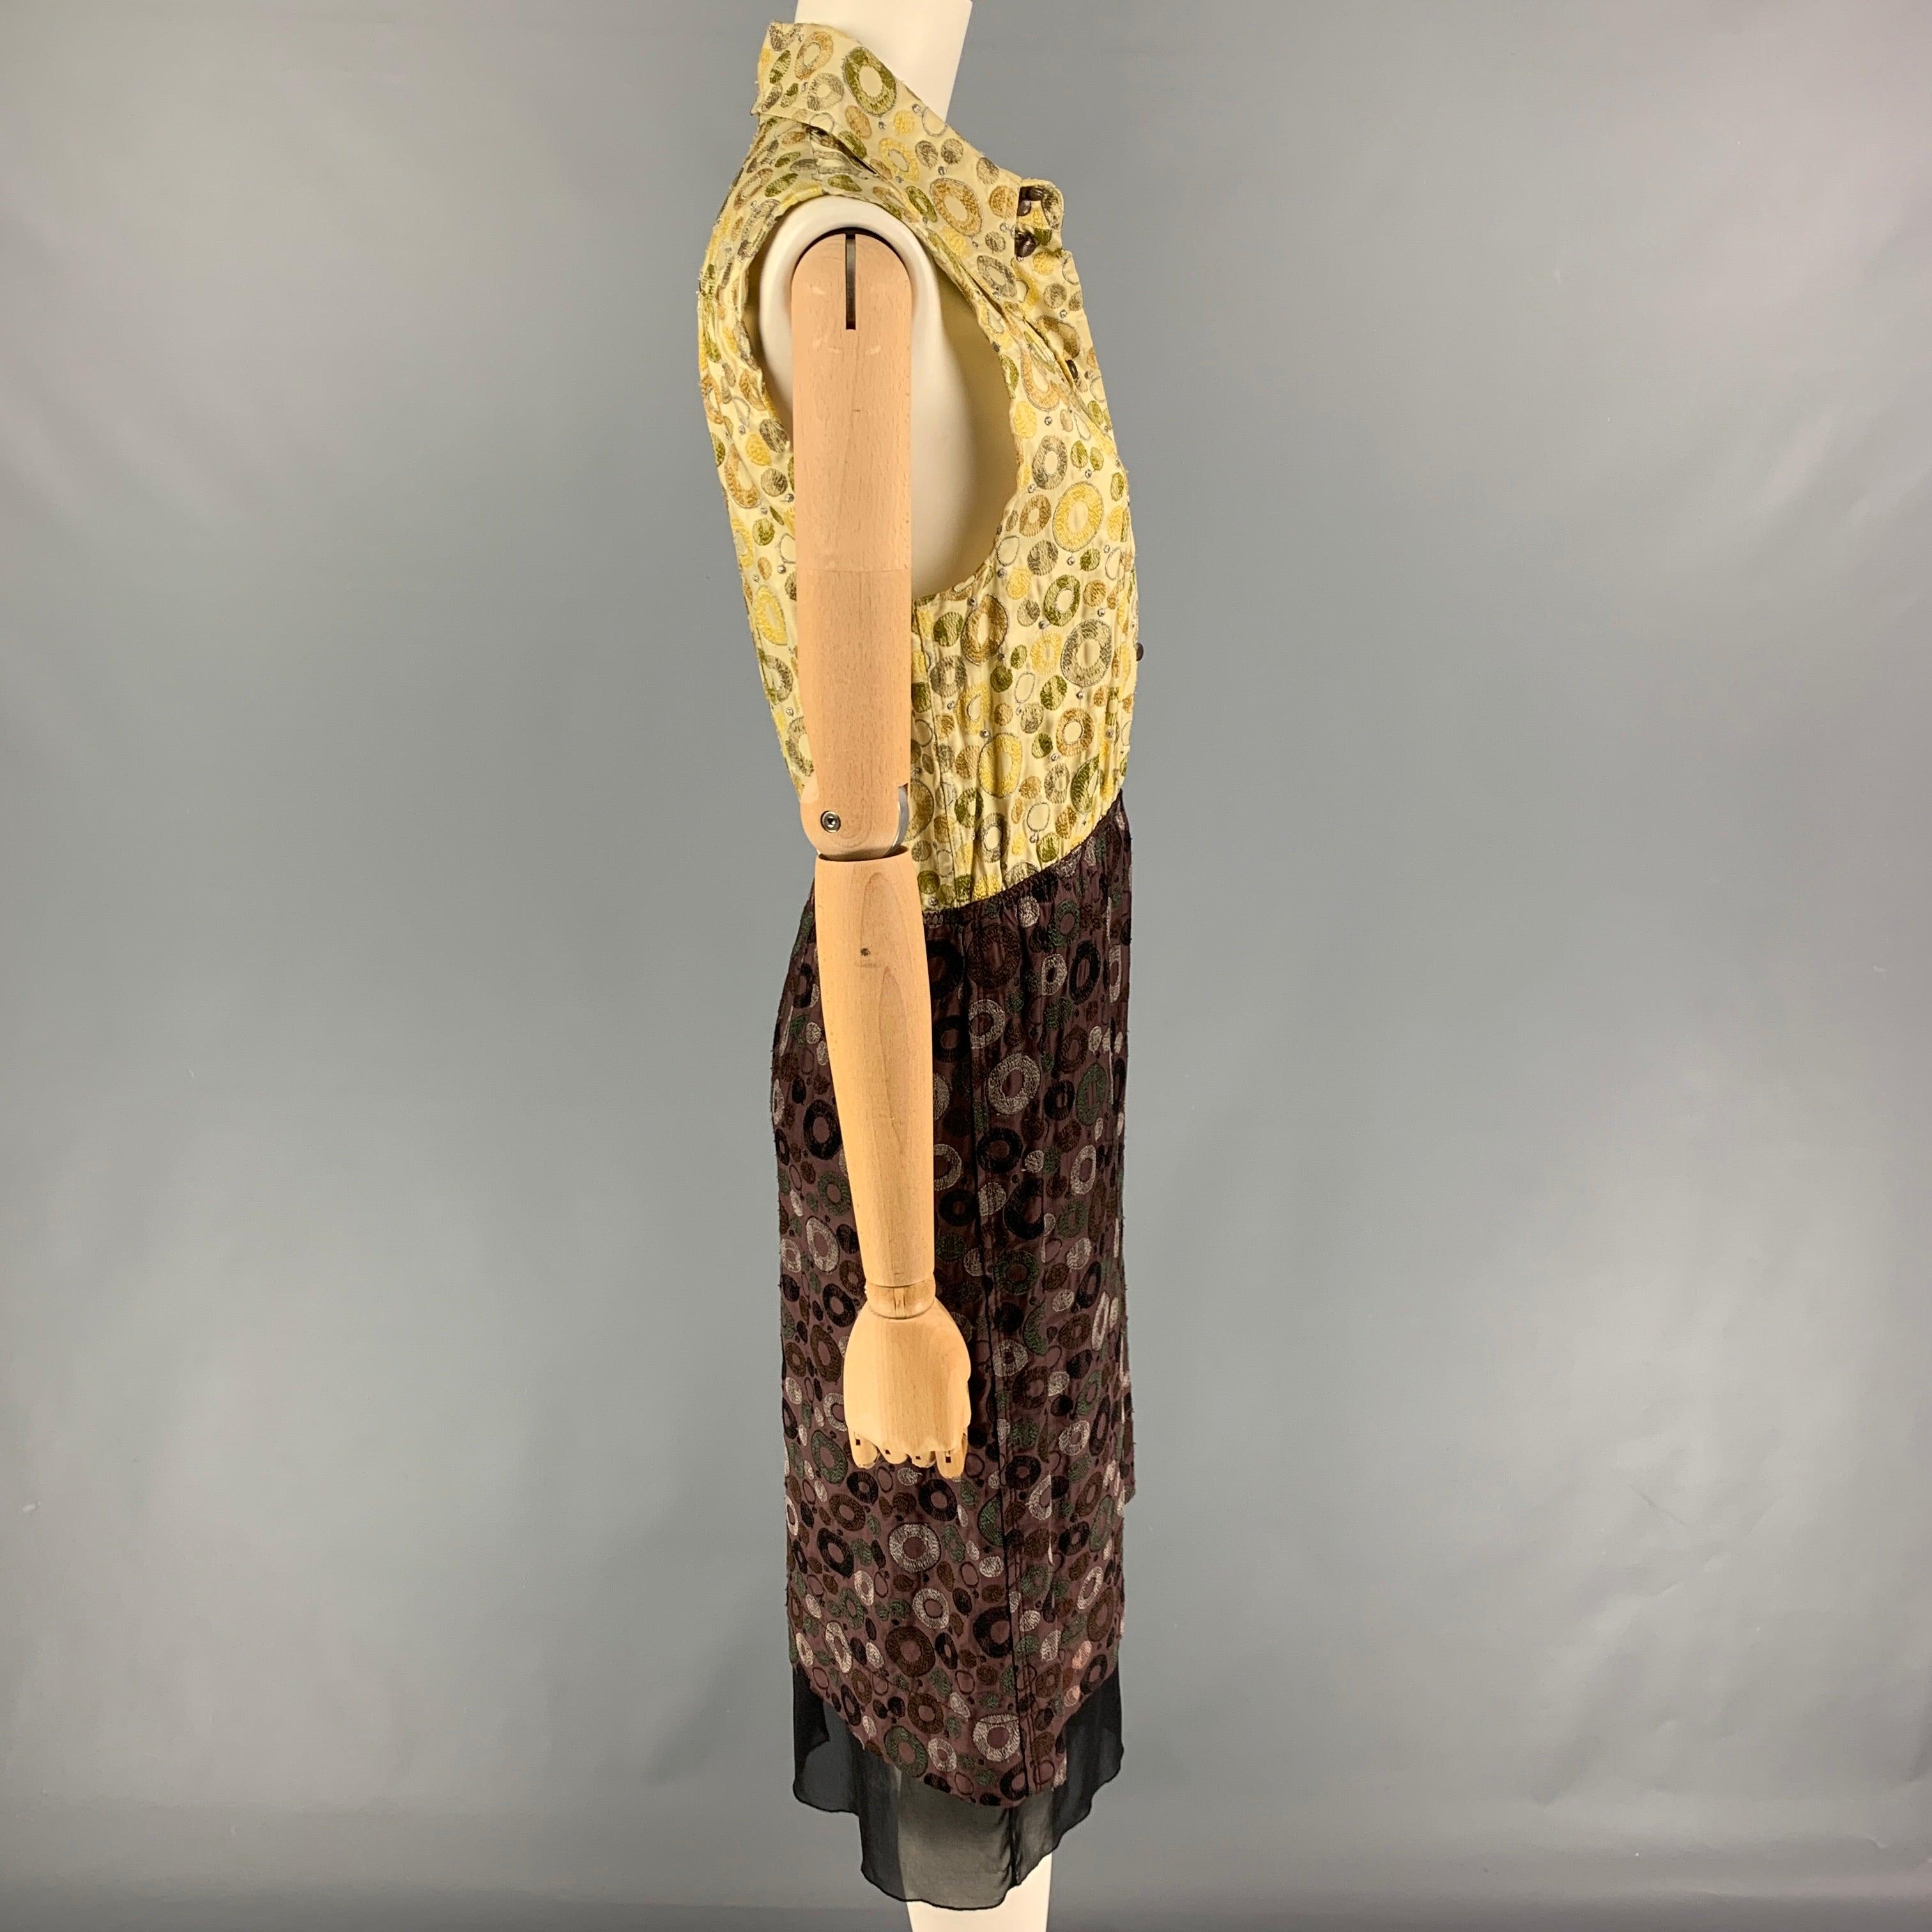 MARC JACOBS dress comes in a yellow & brown color block rayon / silk featuring embroidered designs throughout, sleeveless, pointed collar, elastic waist detail, and a front snap button closure.
Very Good
Pre-Owned Condition. Sleeves have been